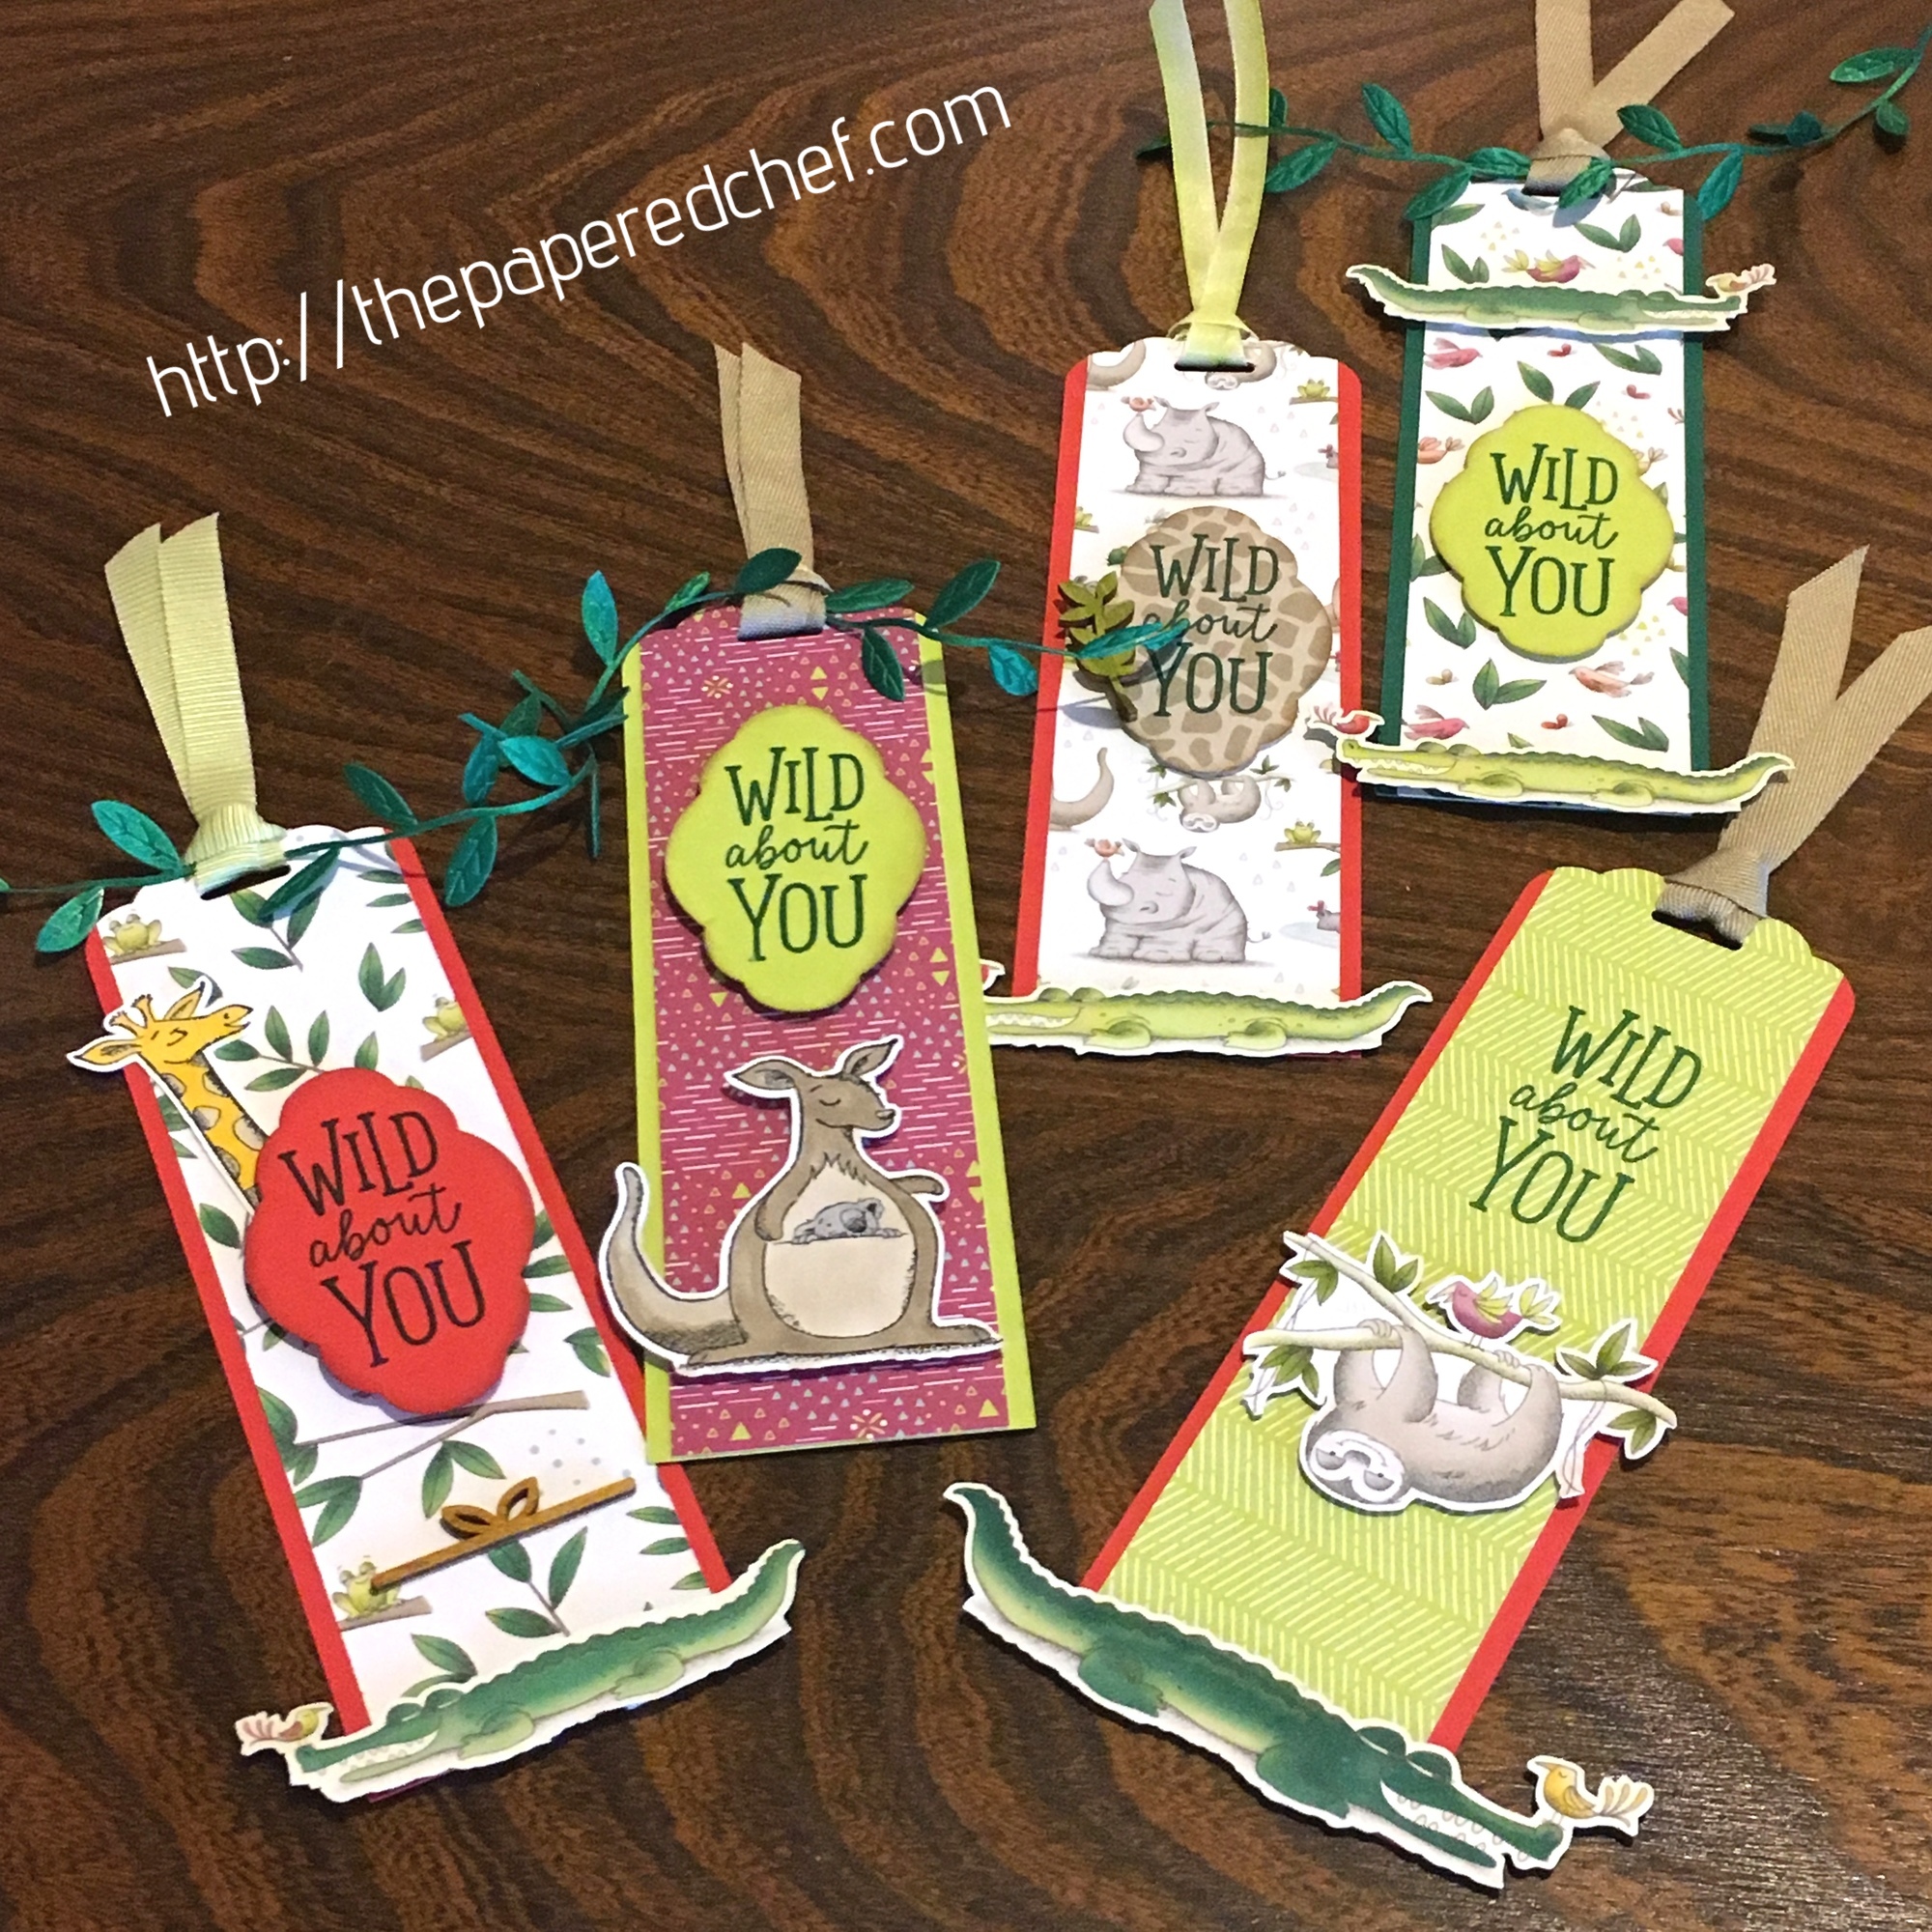 Animal Expedition Bookmarks - Animal Outing by Stampin' Up